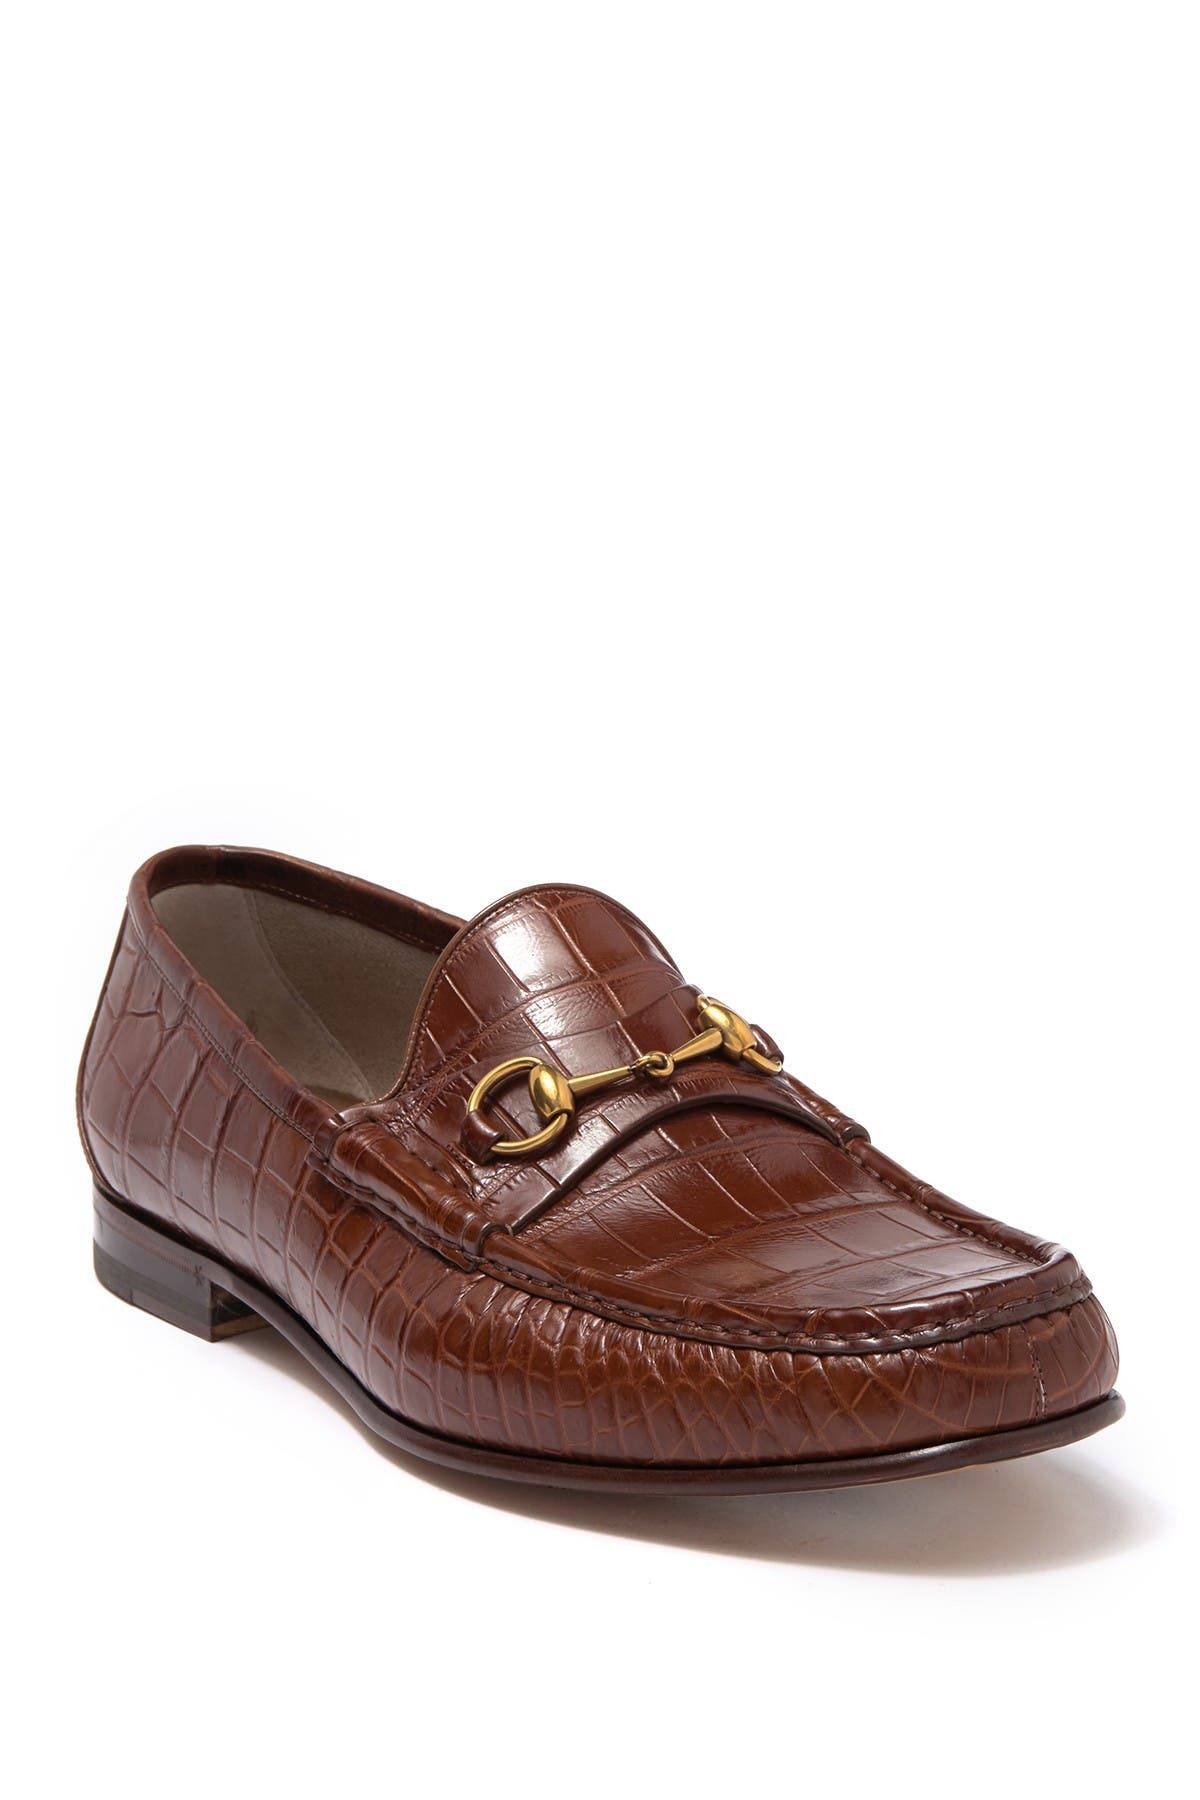 gucci loafers nordstrom rack